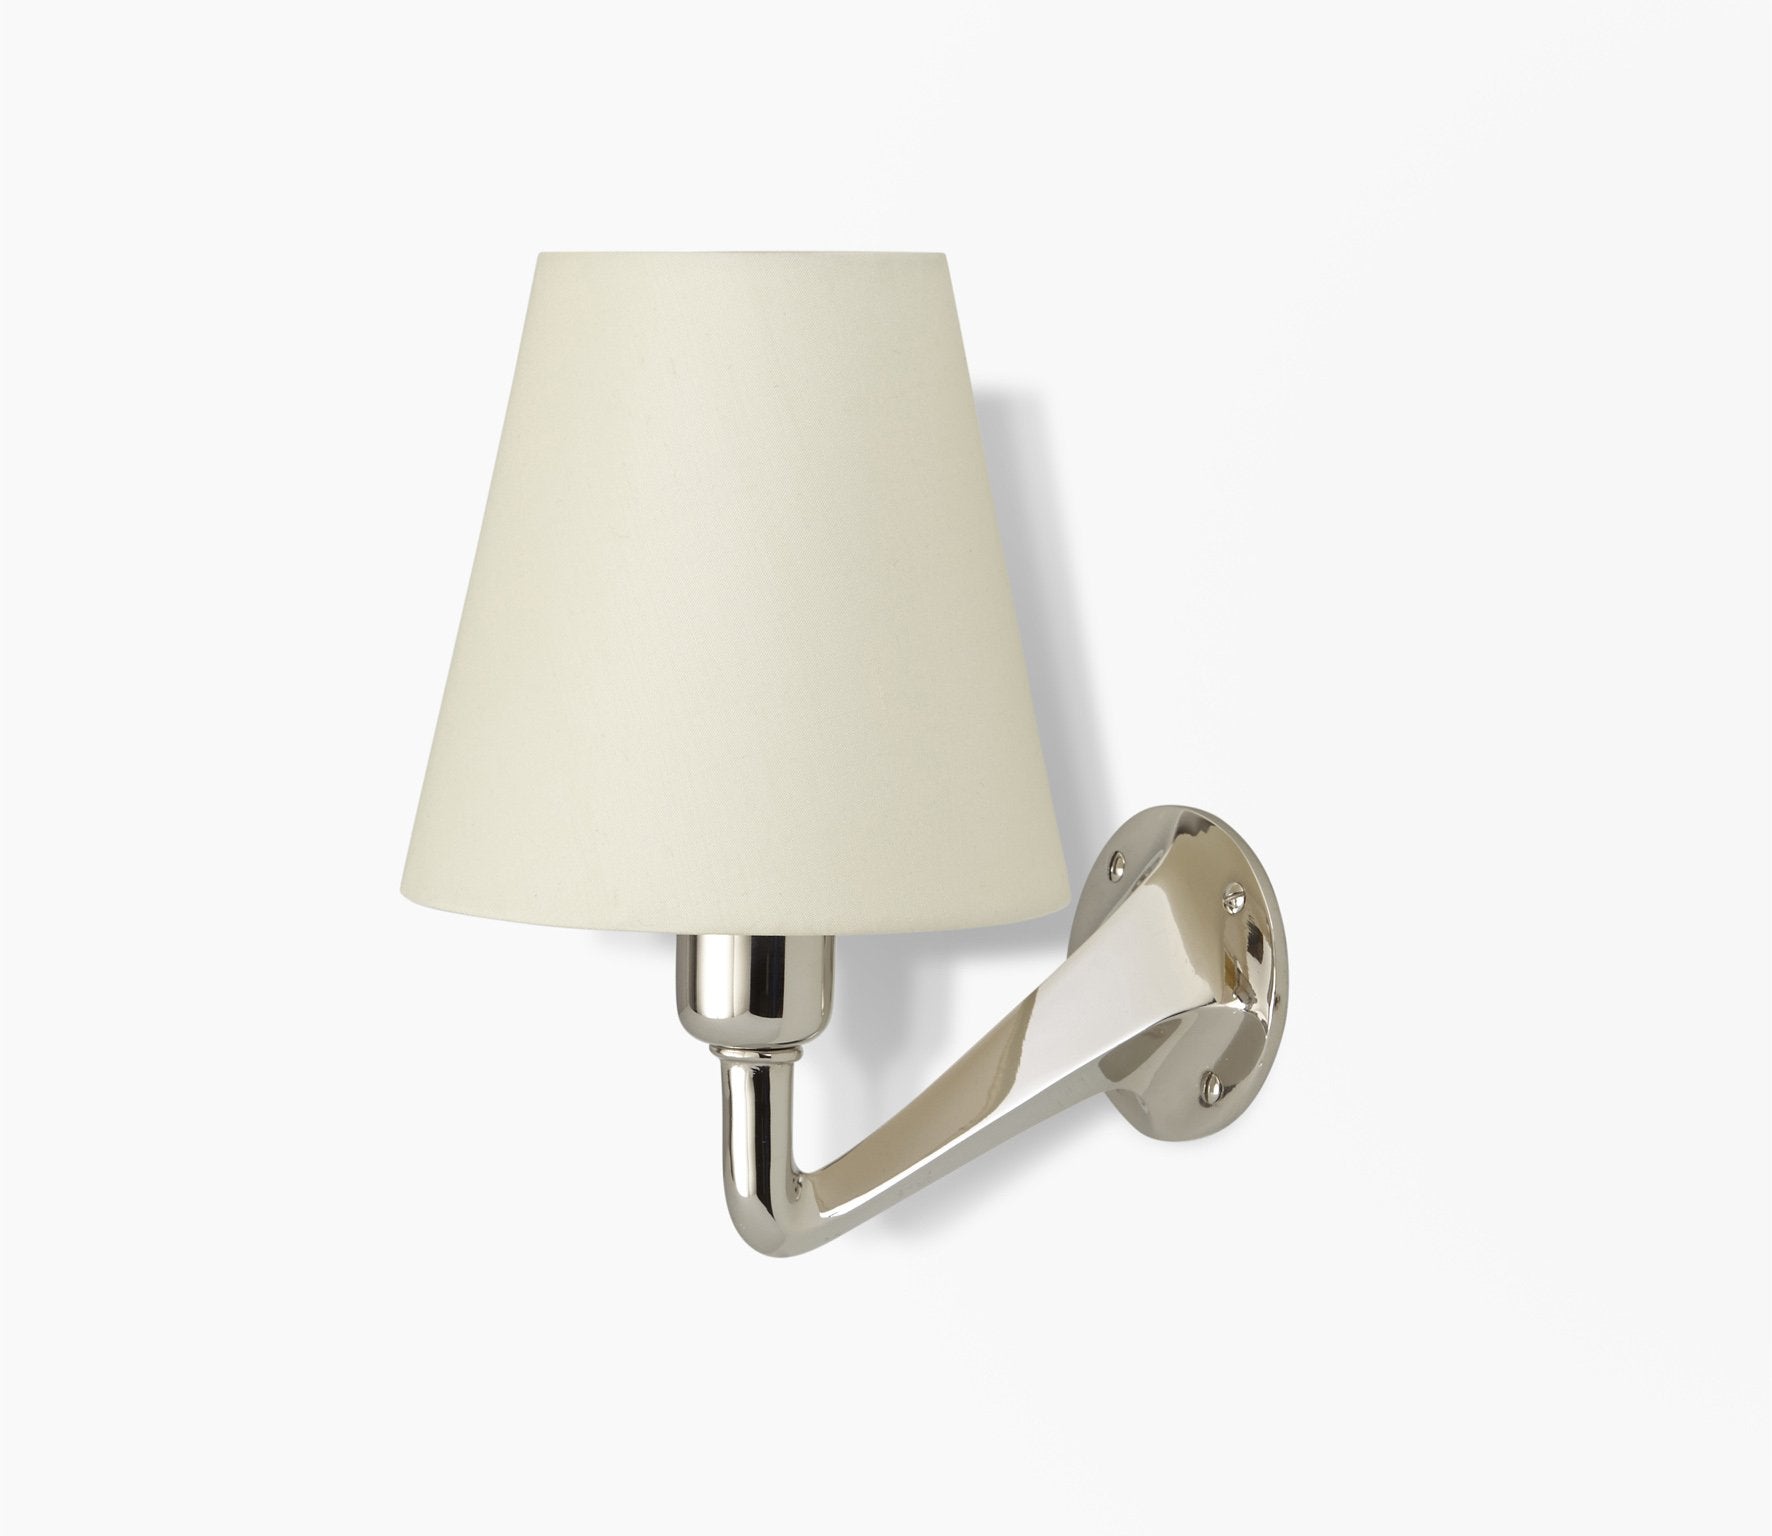 Leila Wall Light with Plain Empire Shade Product Image 6